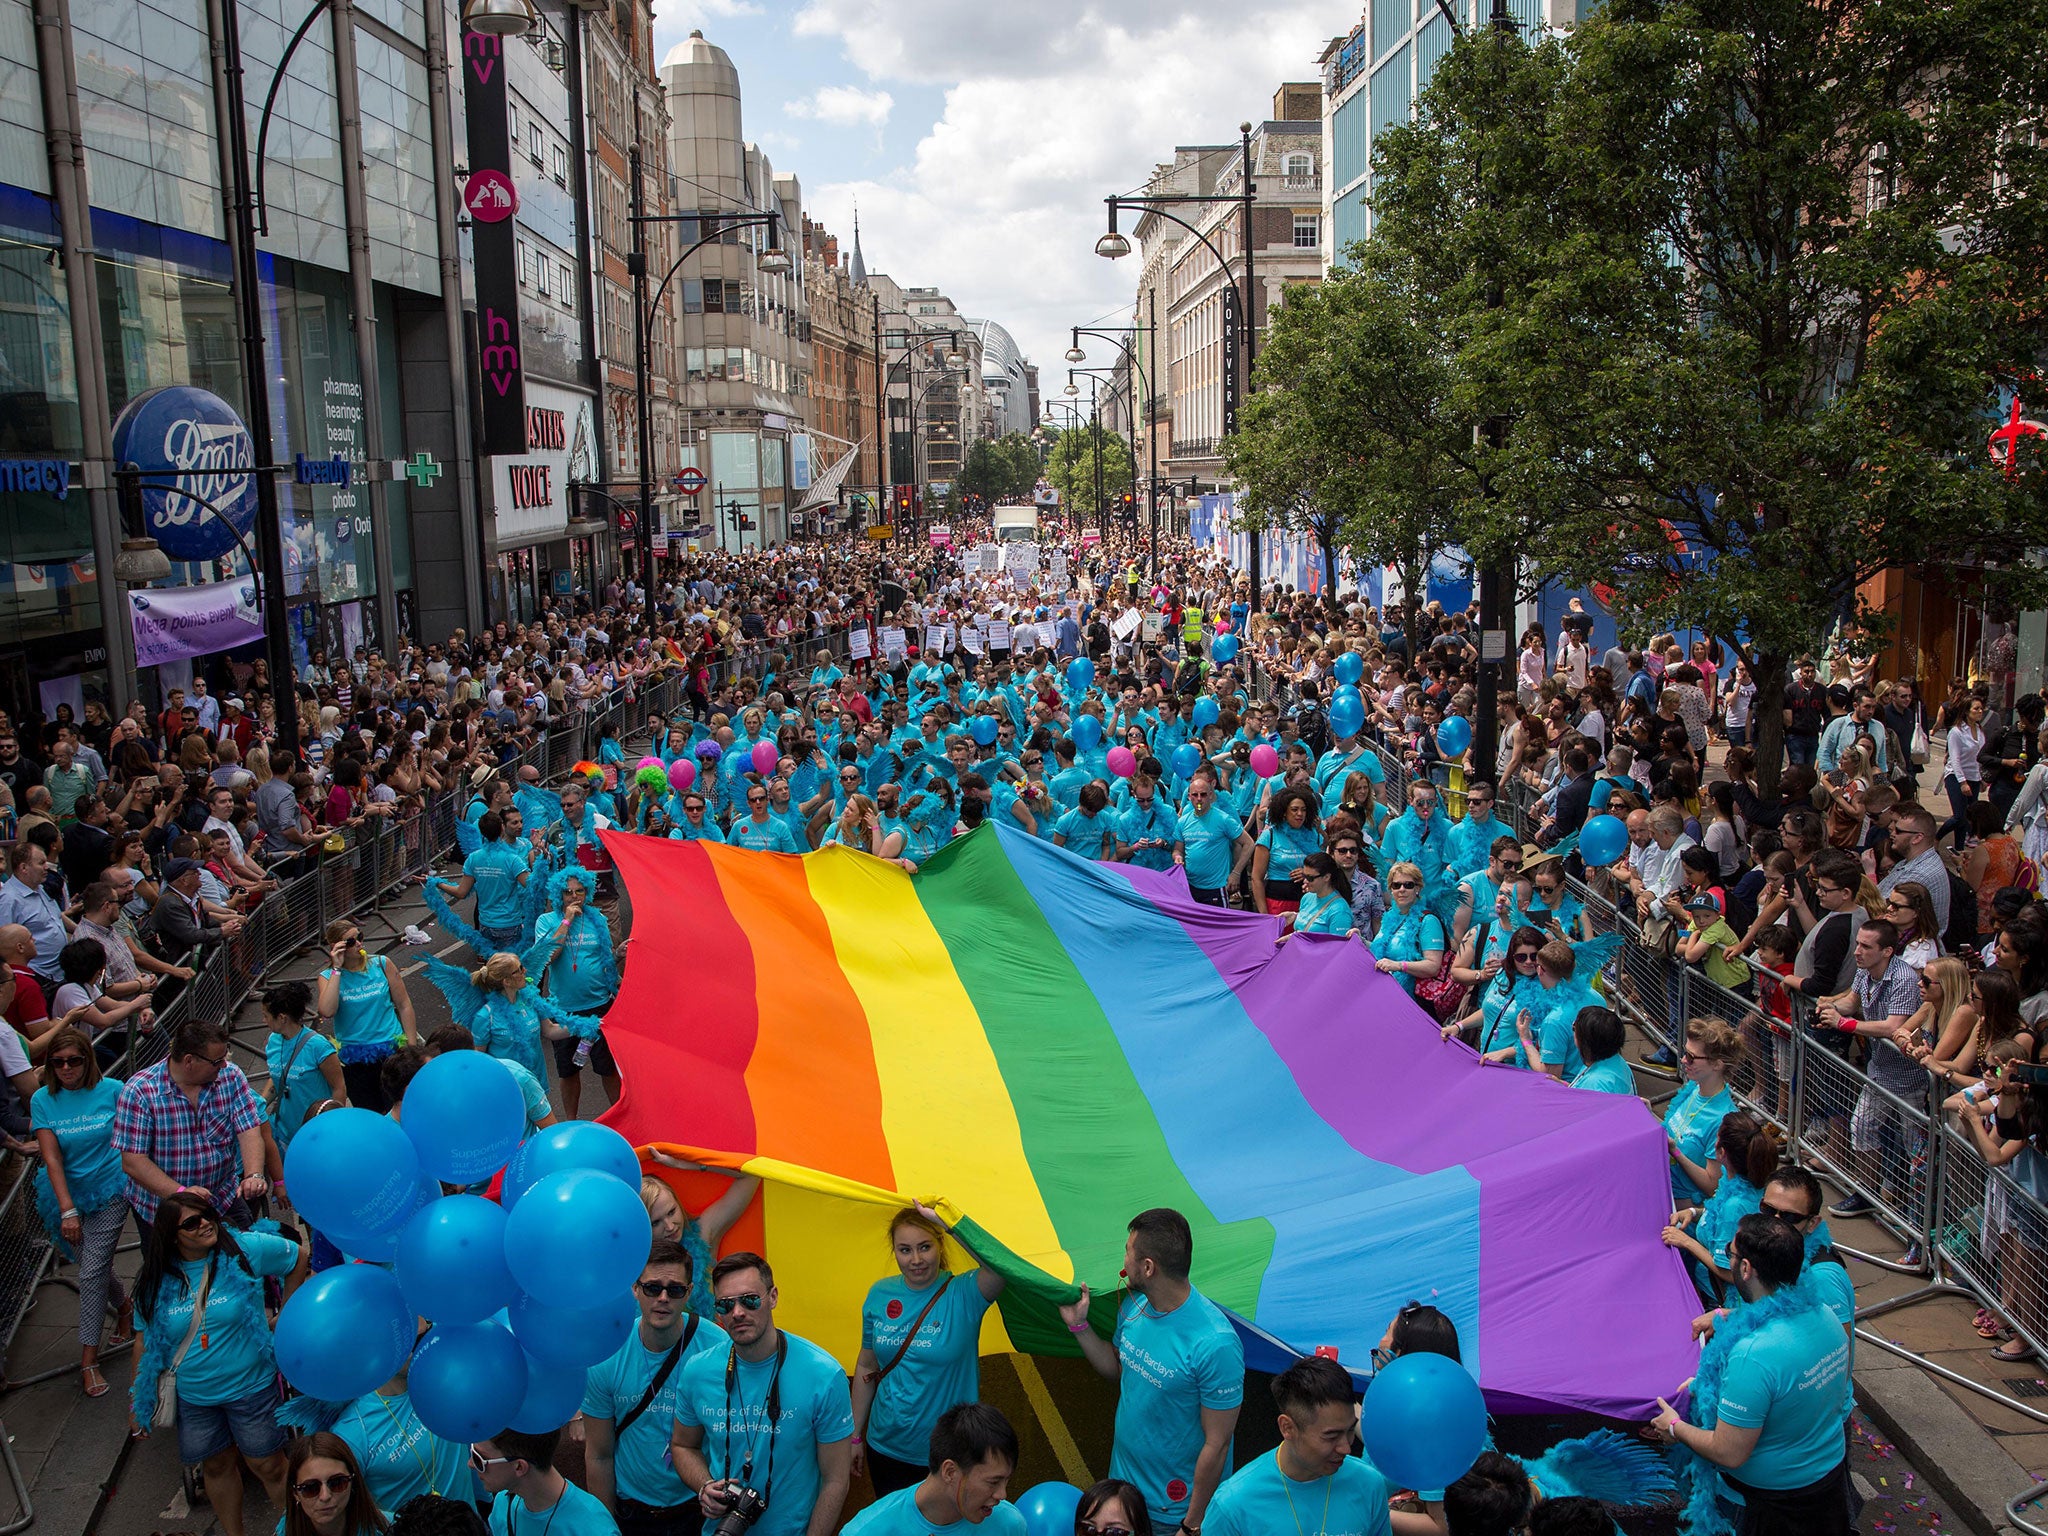 London Pride 30 000 Take Part In Biggest Ever Gay Pride Parade The